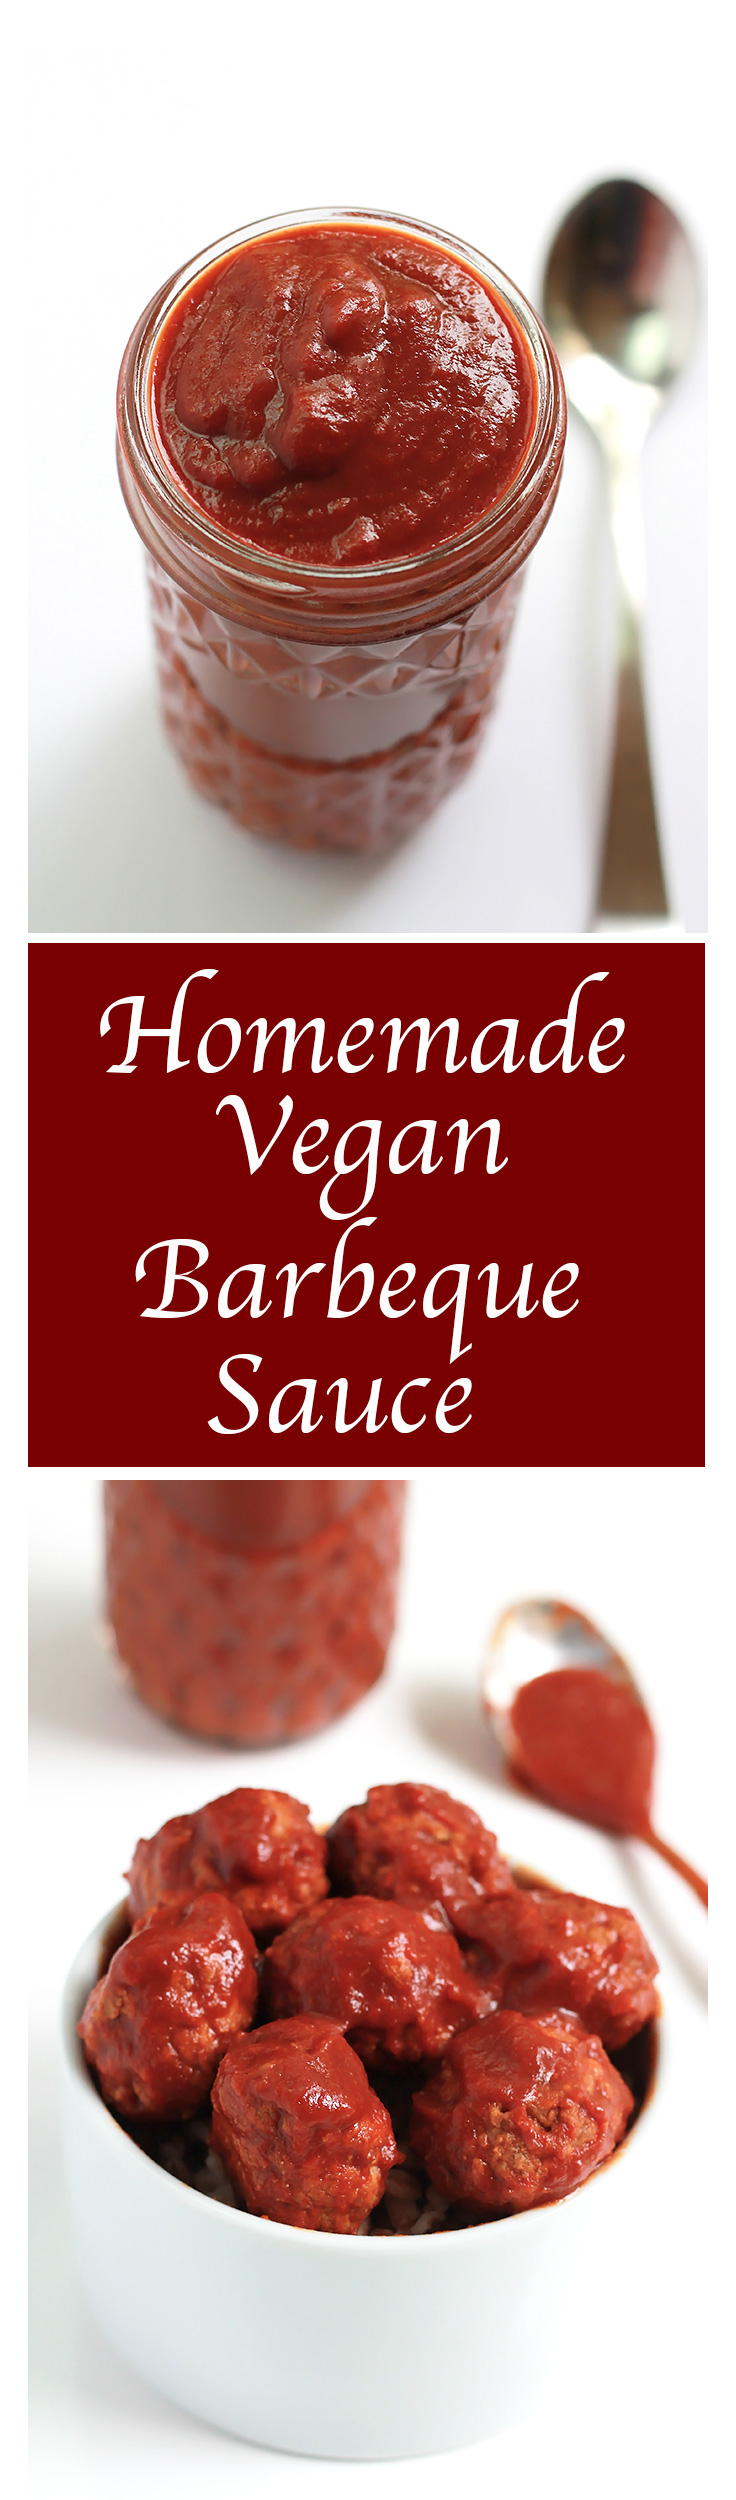 Thick, tangy and sweet with a little bit of smoky is the best way to describe this Homemade Vegan Barbeque Sauce, and just in time for the upcoming grilling season.